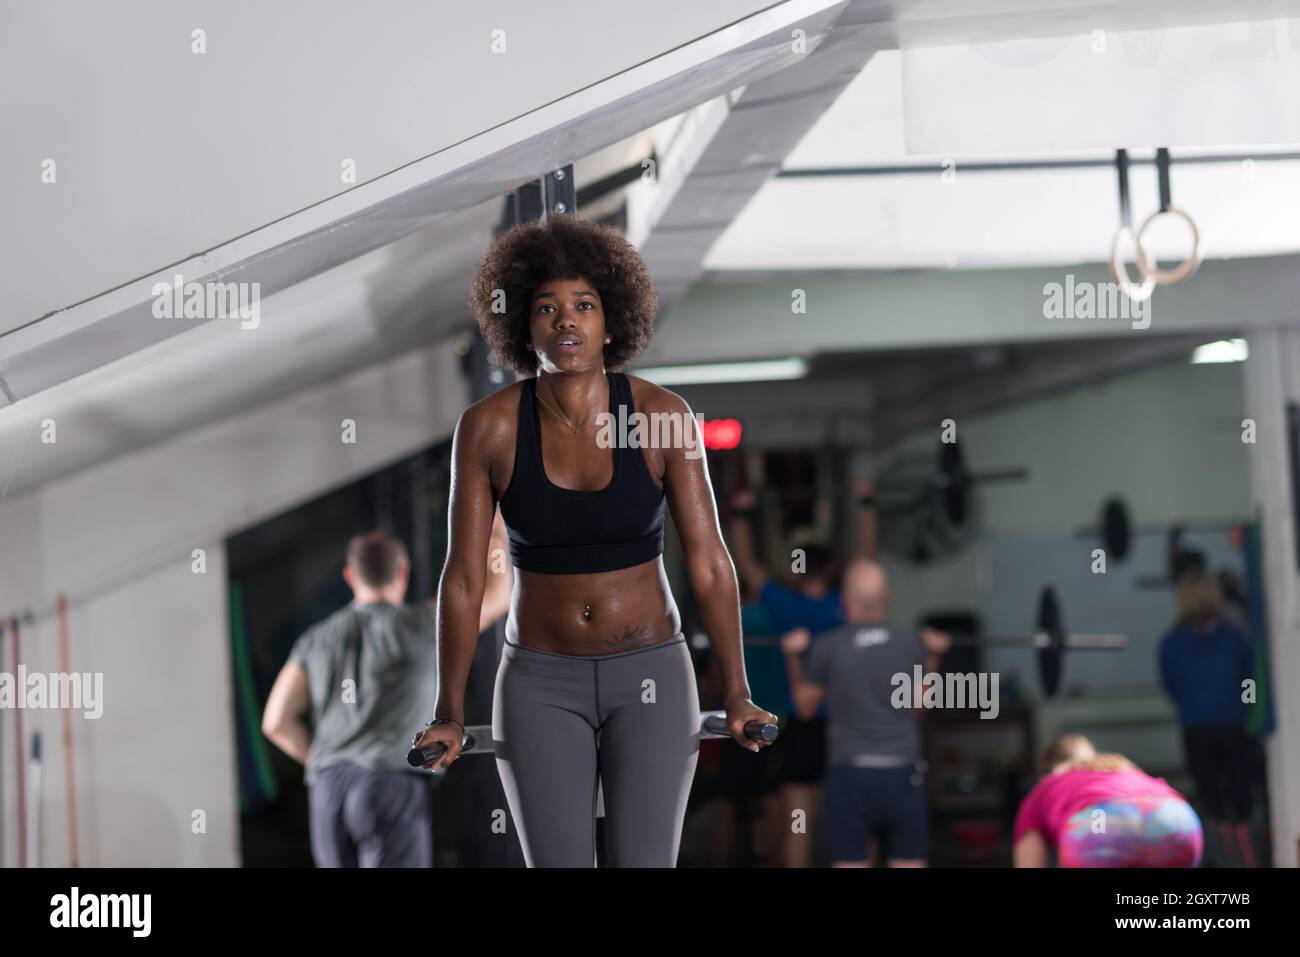 https://c8.alamy.com/comp/2GXT7WB/african-american-athlete-woman-workout-out-arms-on-dips-horizontal-parallel-bars-exercise-training-triceps-and-biceps-doing-push-ups-2GXT7WB.jpg